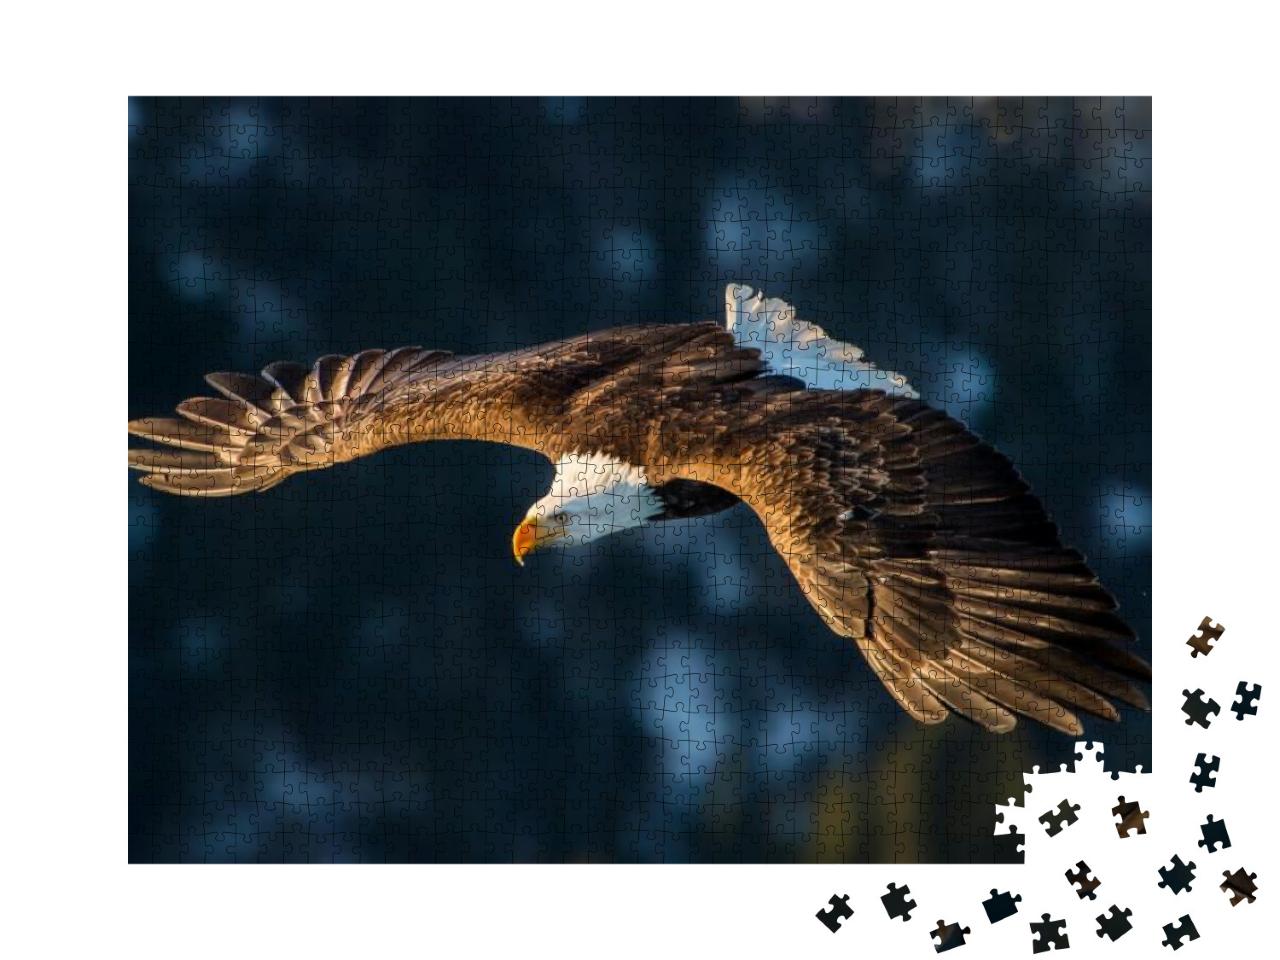 American Bald Eagle Diving in Flight Against Forested Ala... Jigsaw Puzzle with 1000 pieces